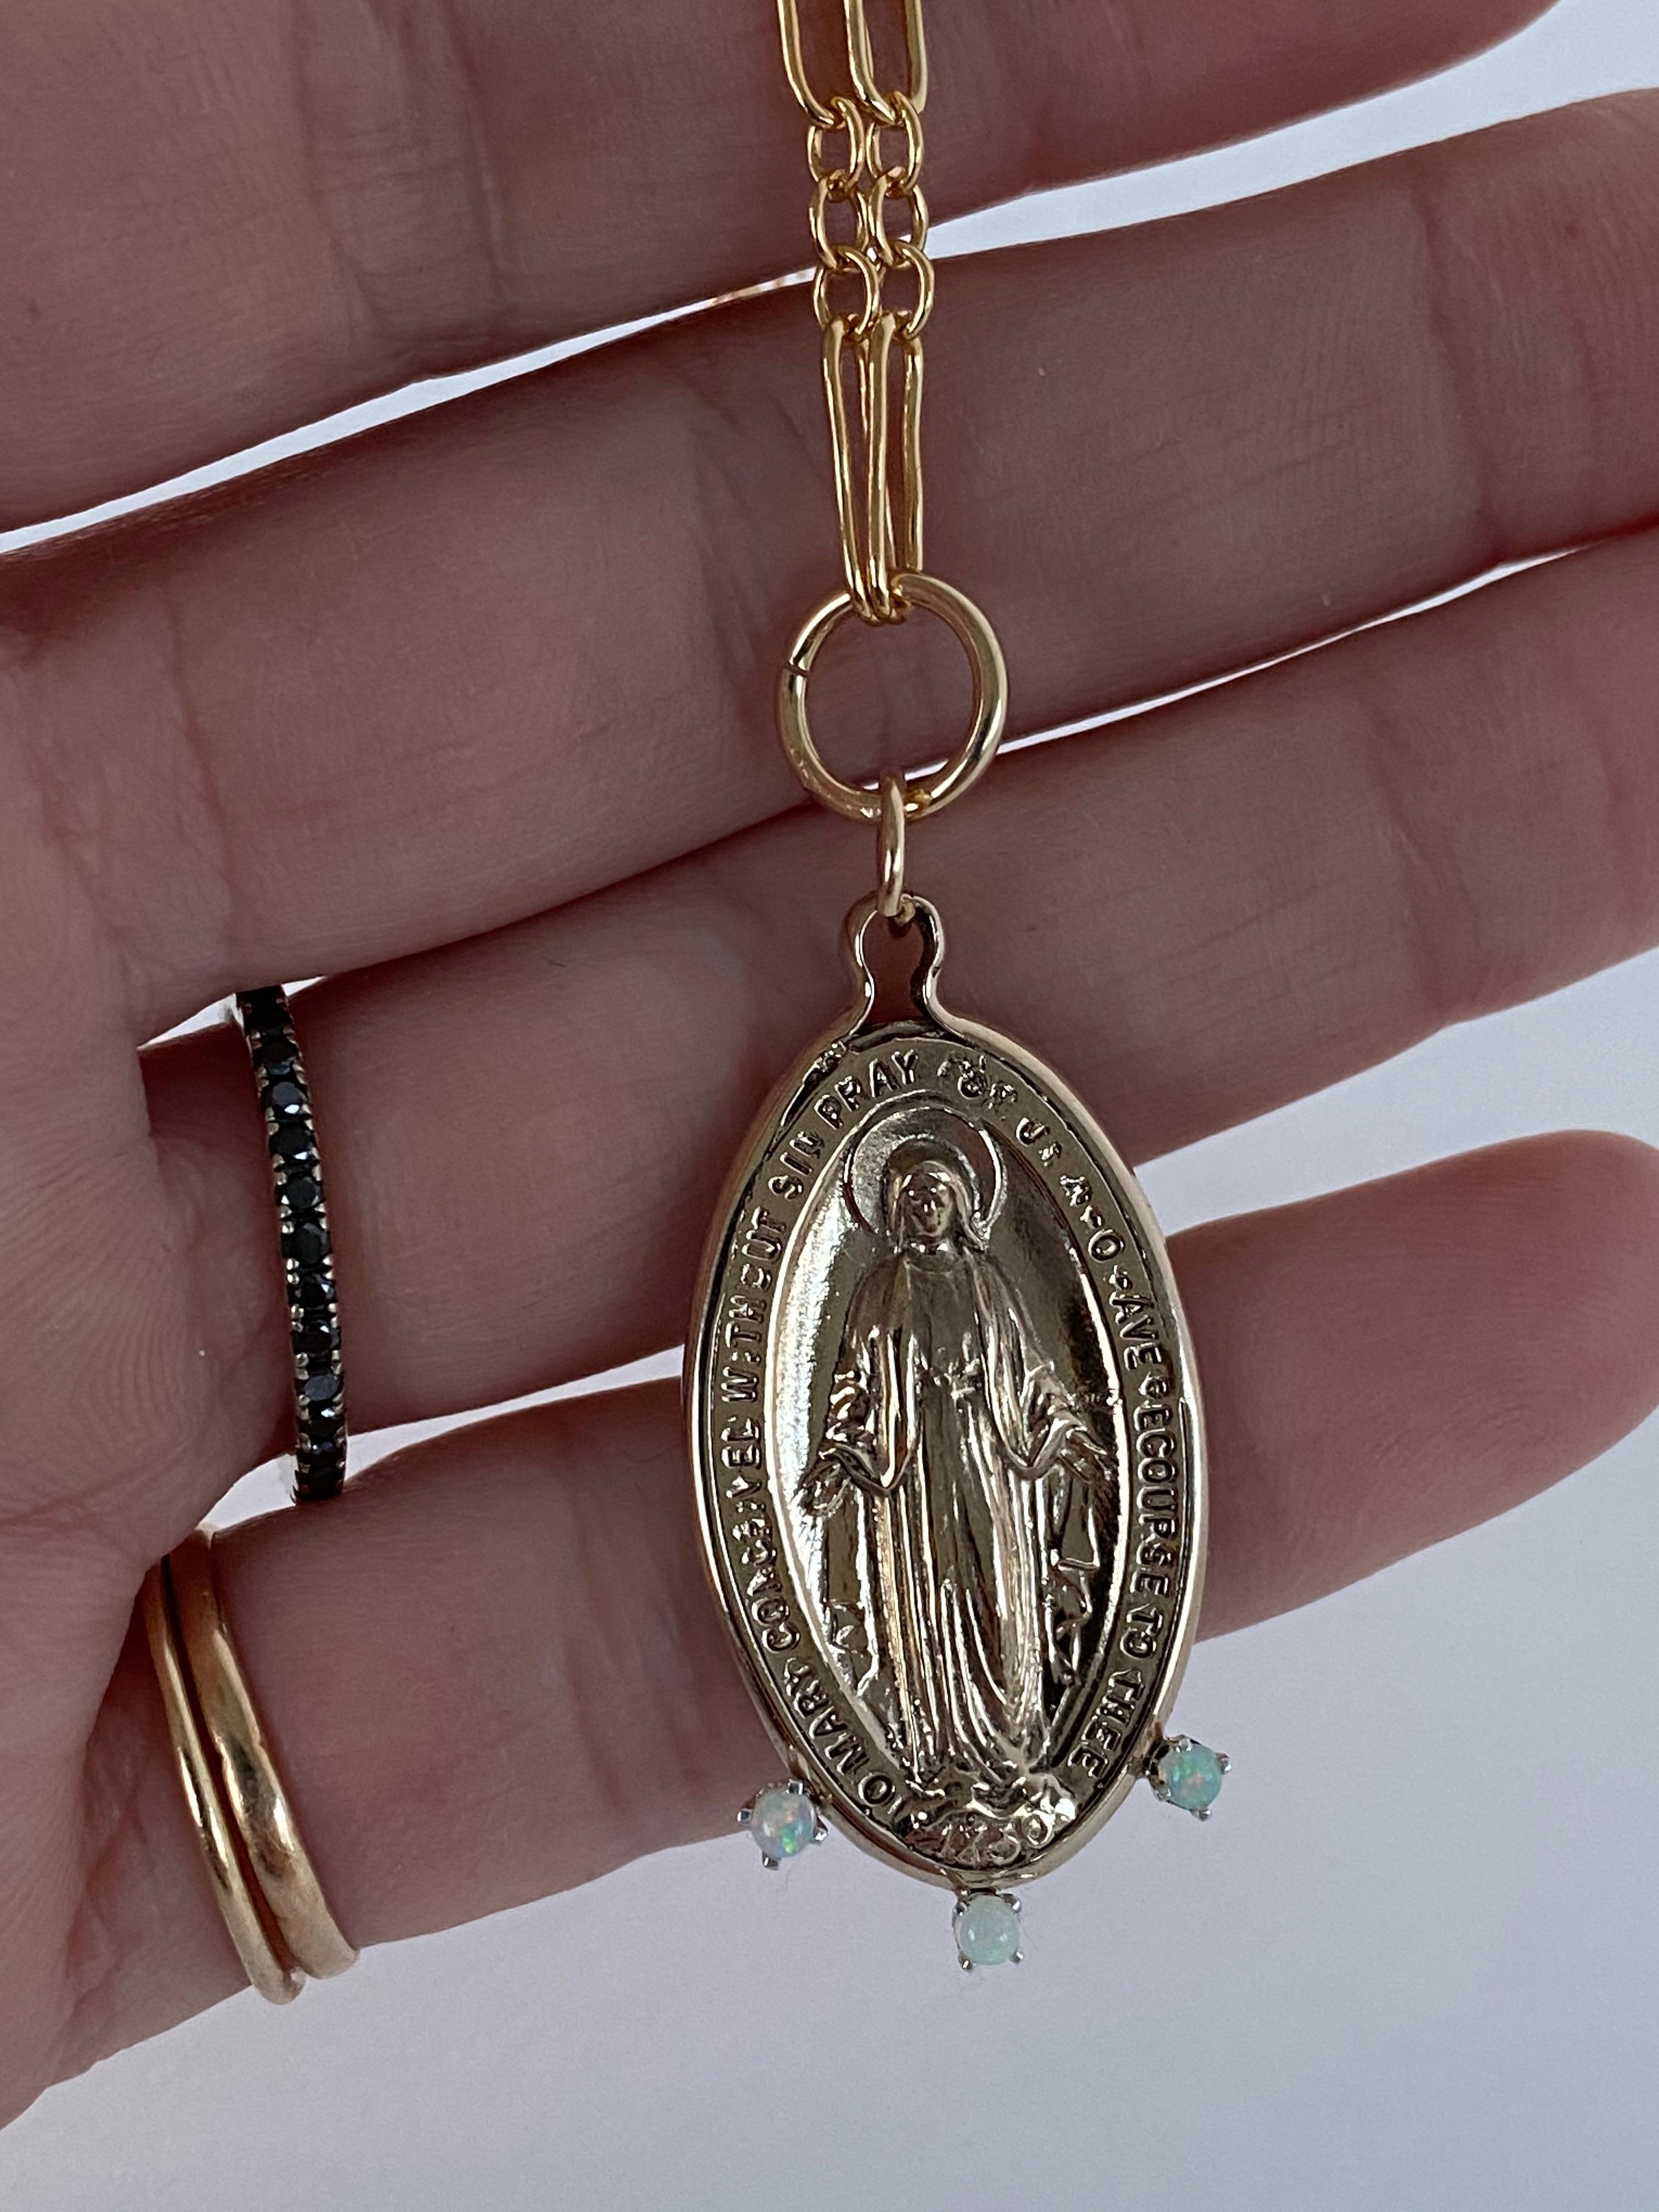 virgin mary necklace meaning